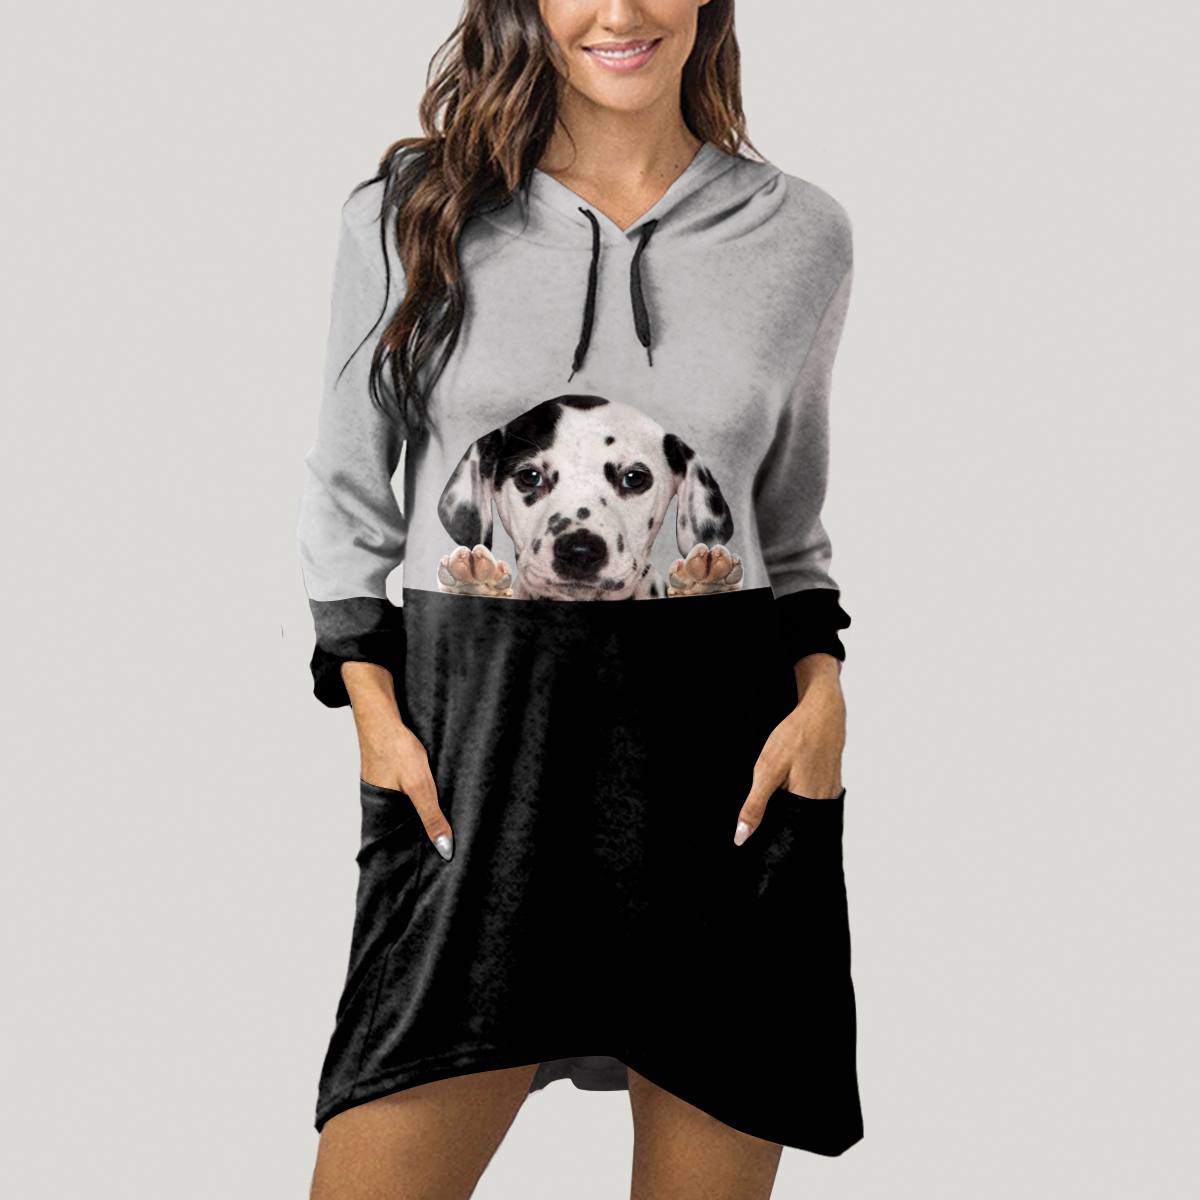 Can You See Me Now - Dalmatian Hoodie With Ears V1